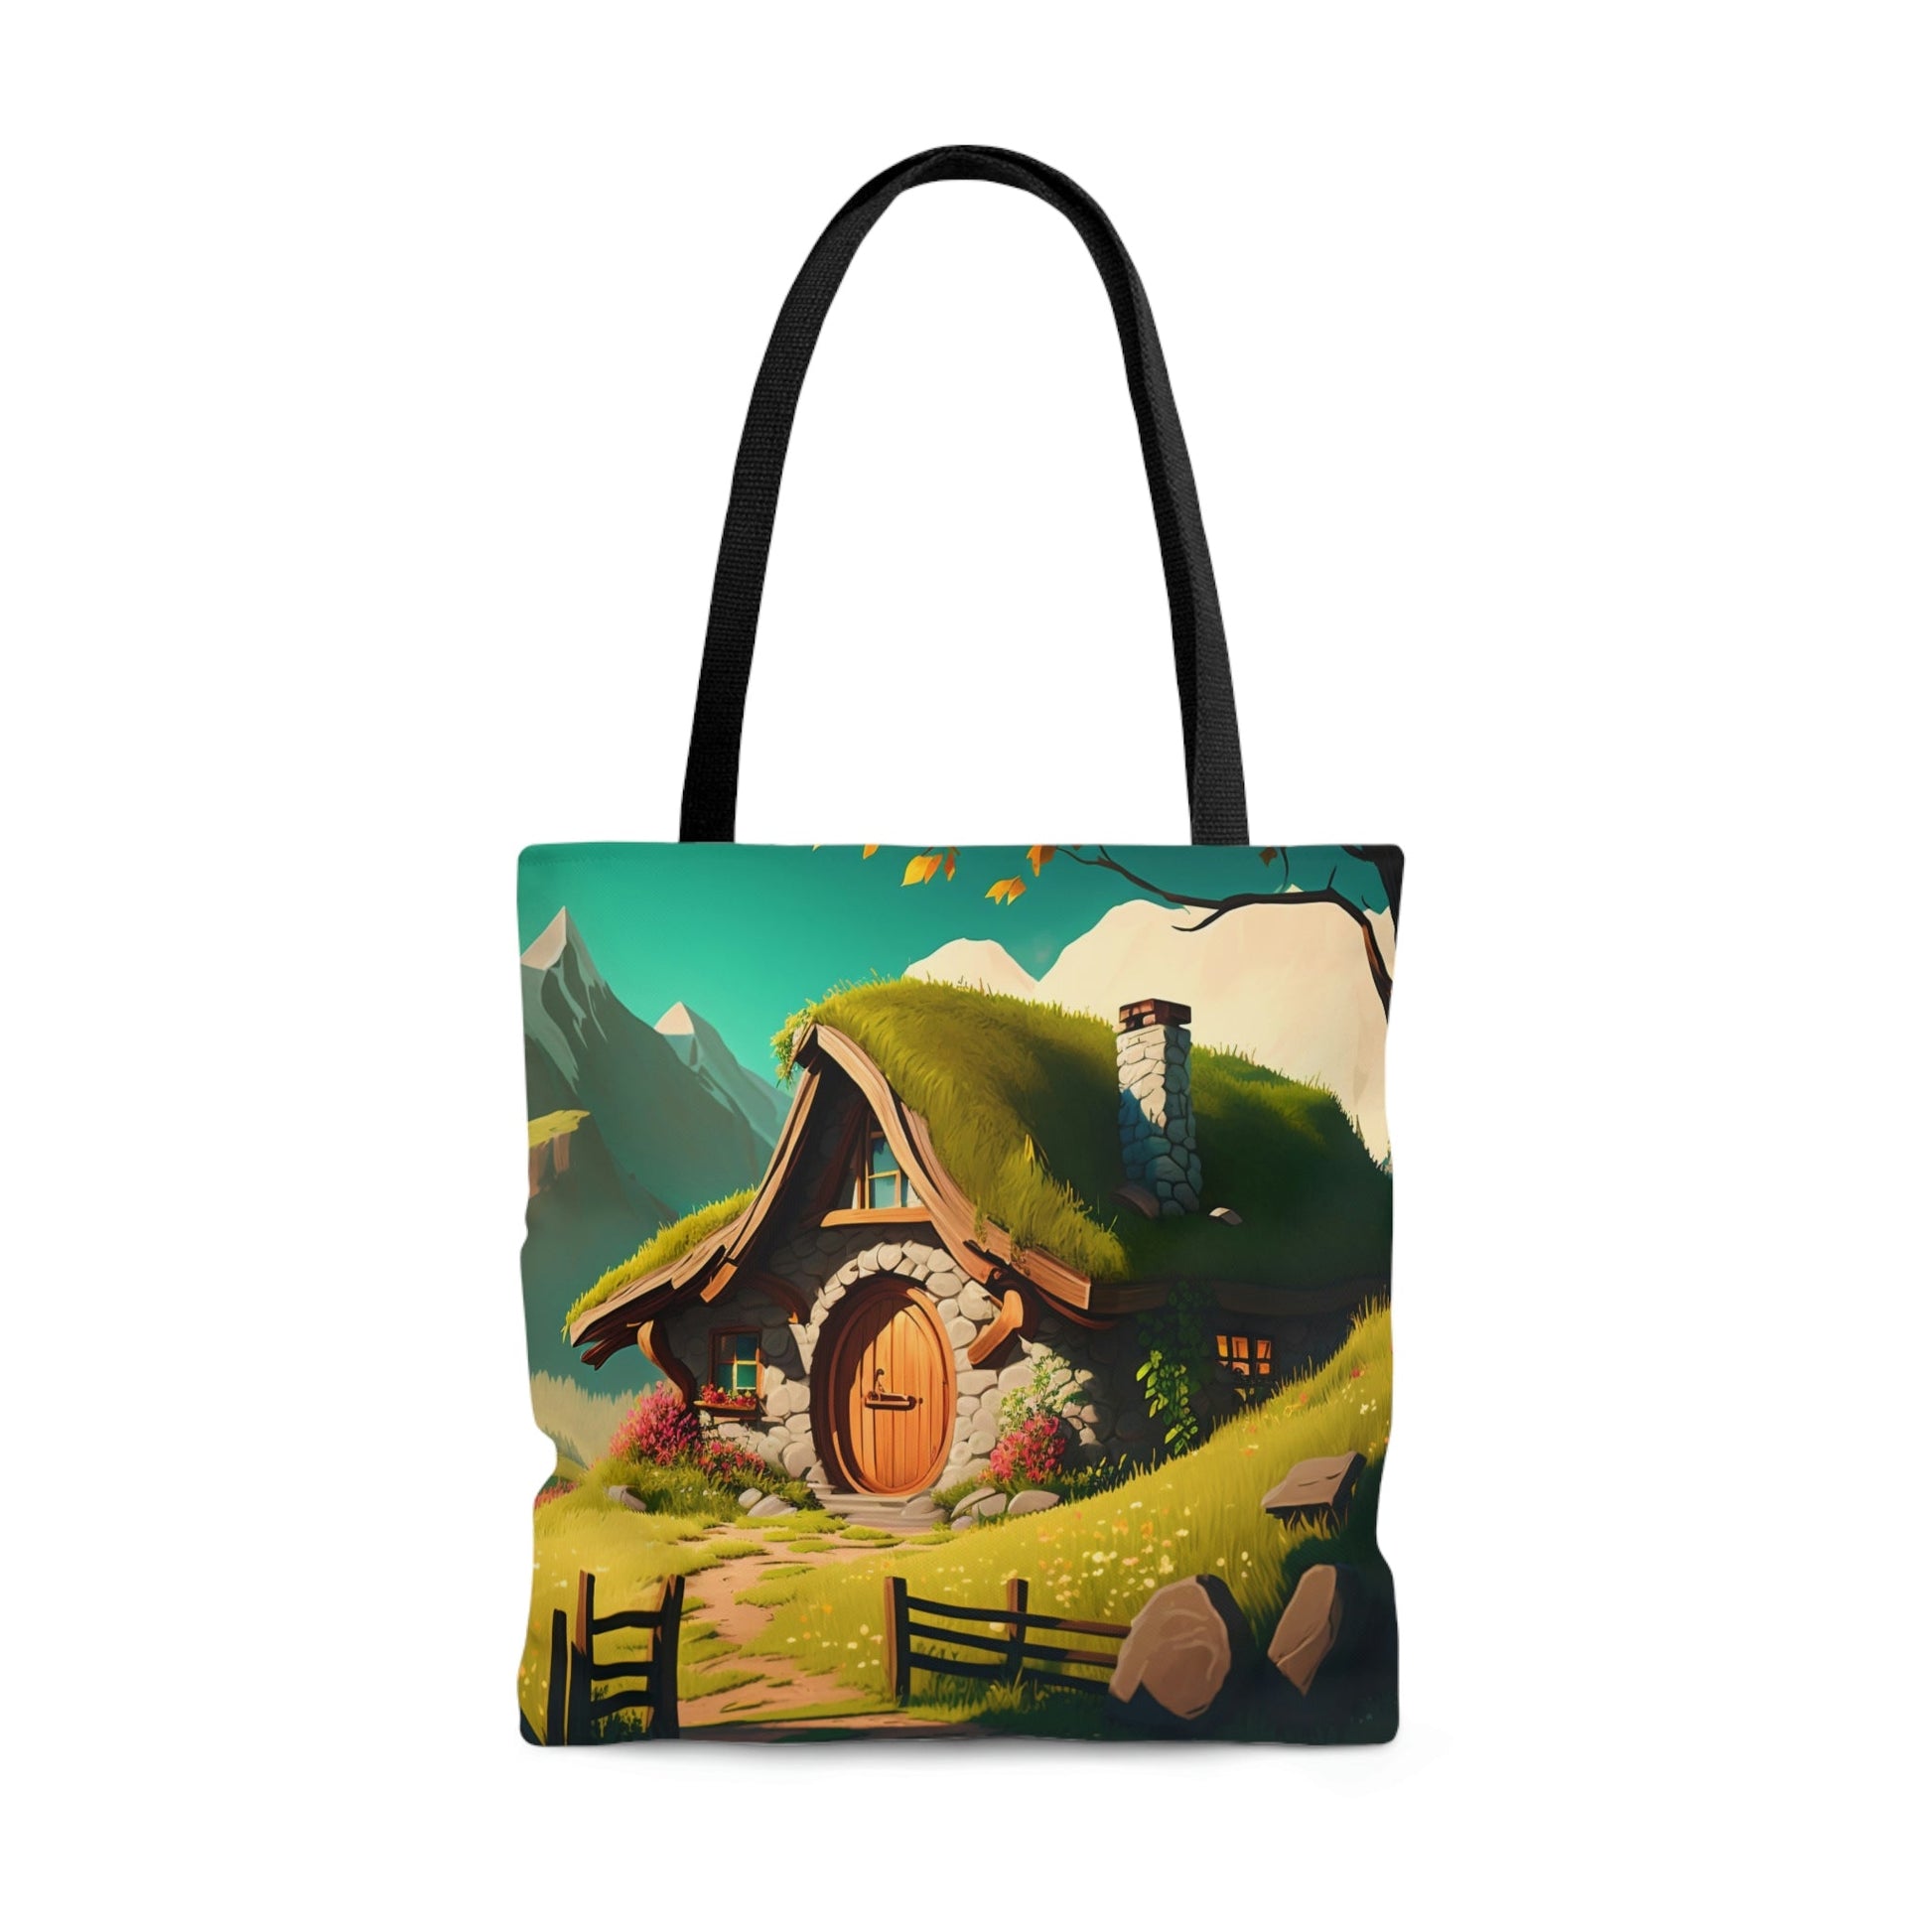 Middle Earth Hobbit Hole Tote Bag - Cute Cottagecore Totebag Makes the Perfect Gift for LOTR Fans